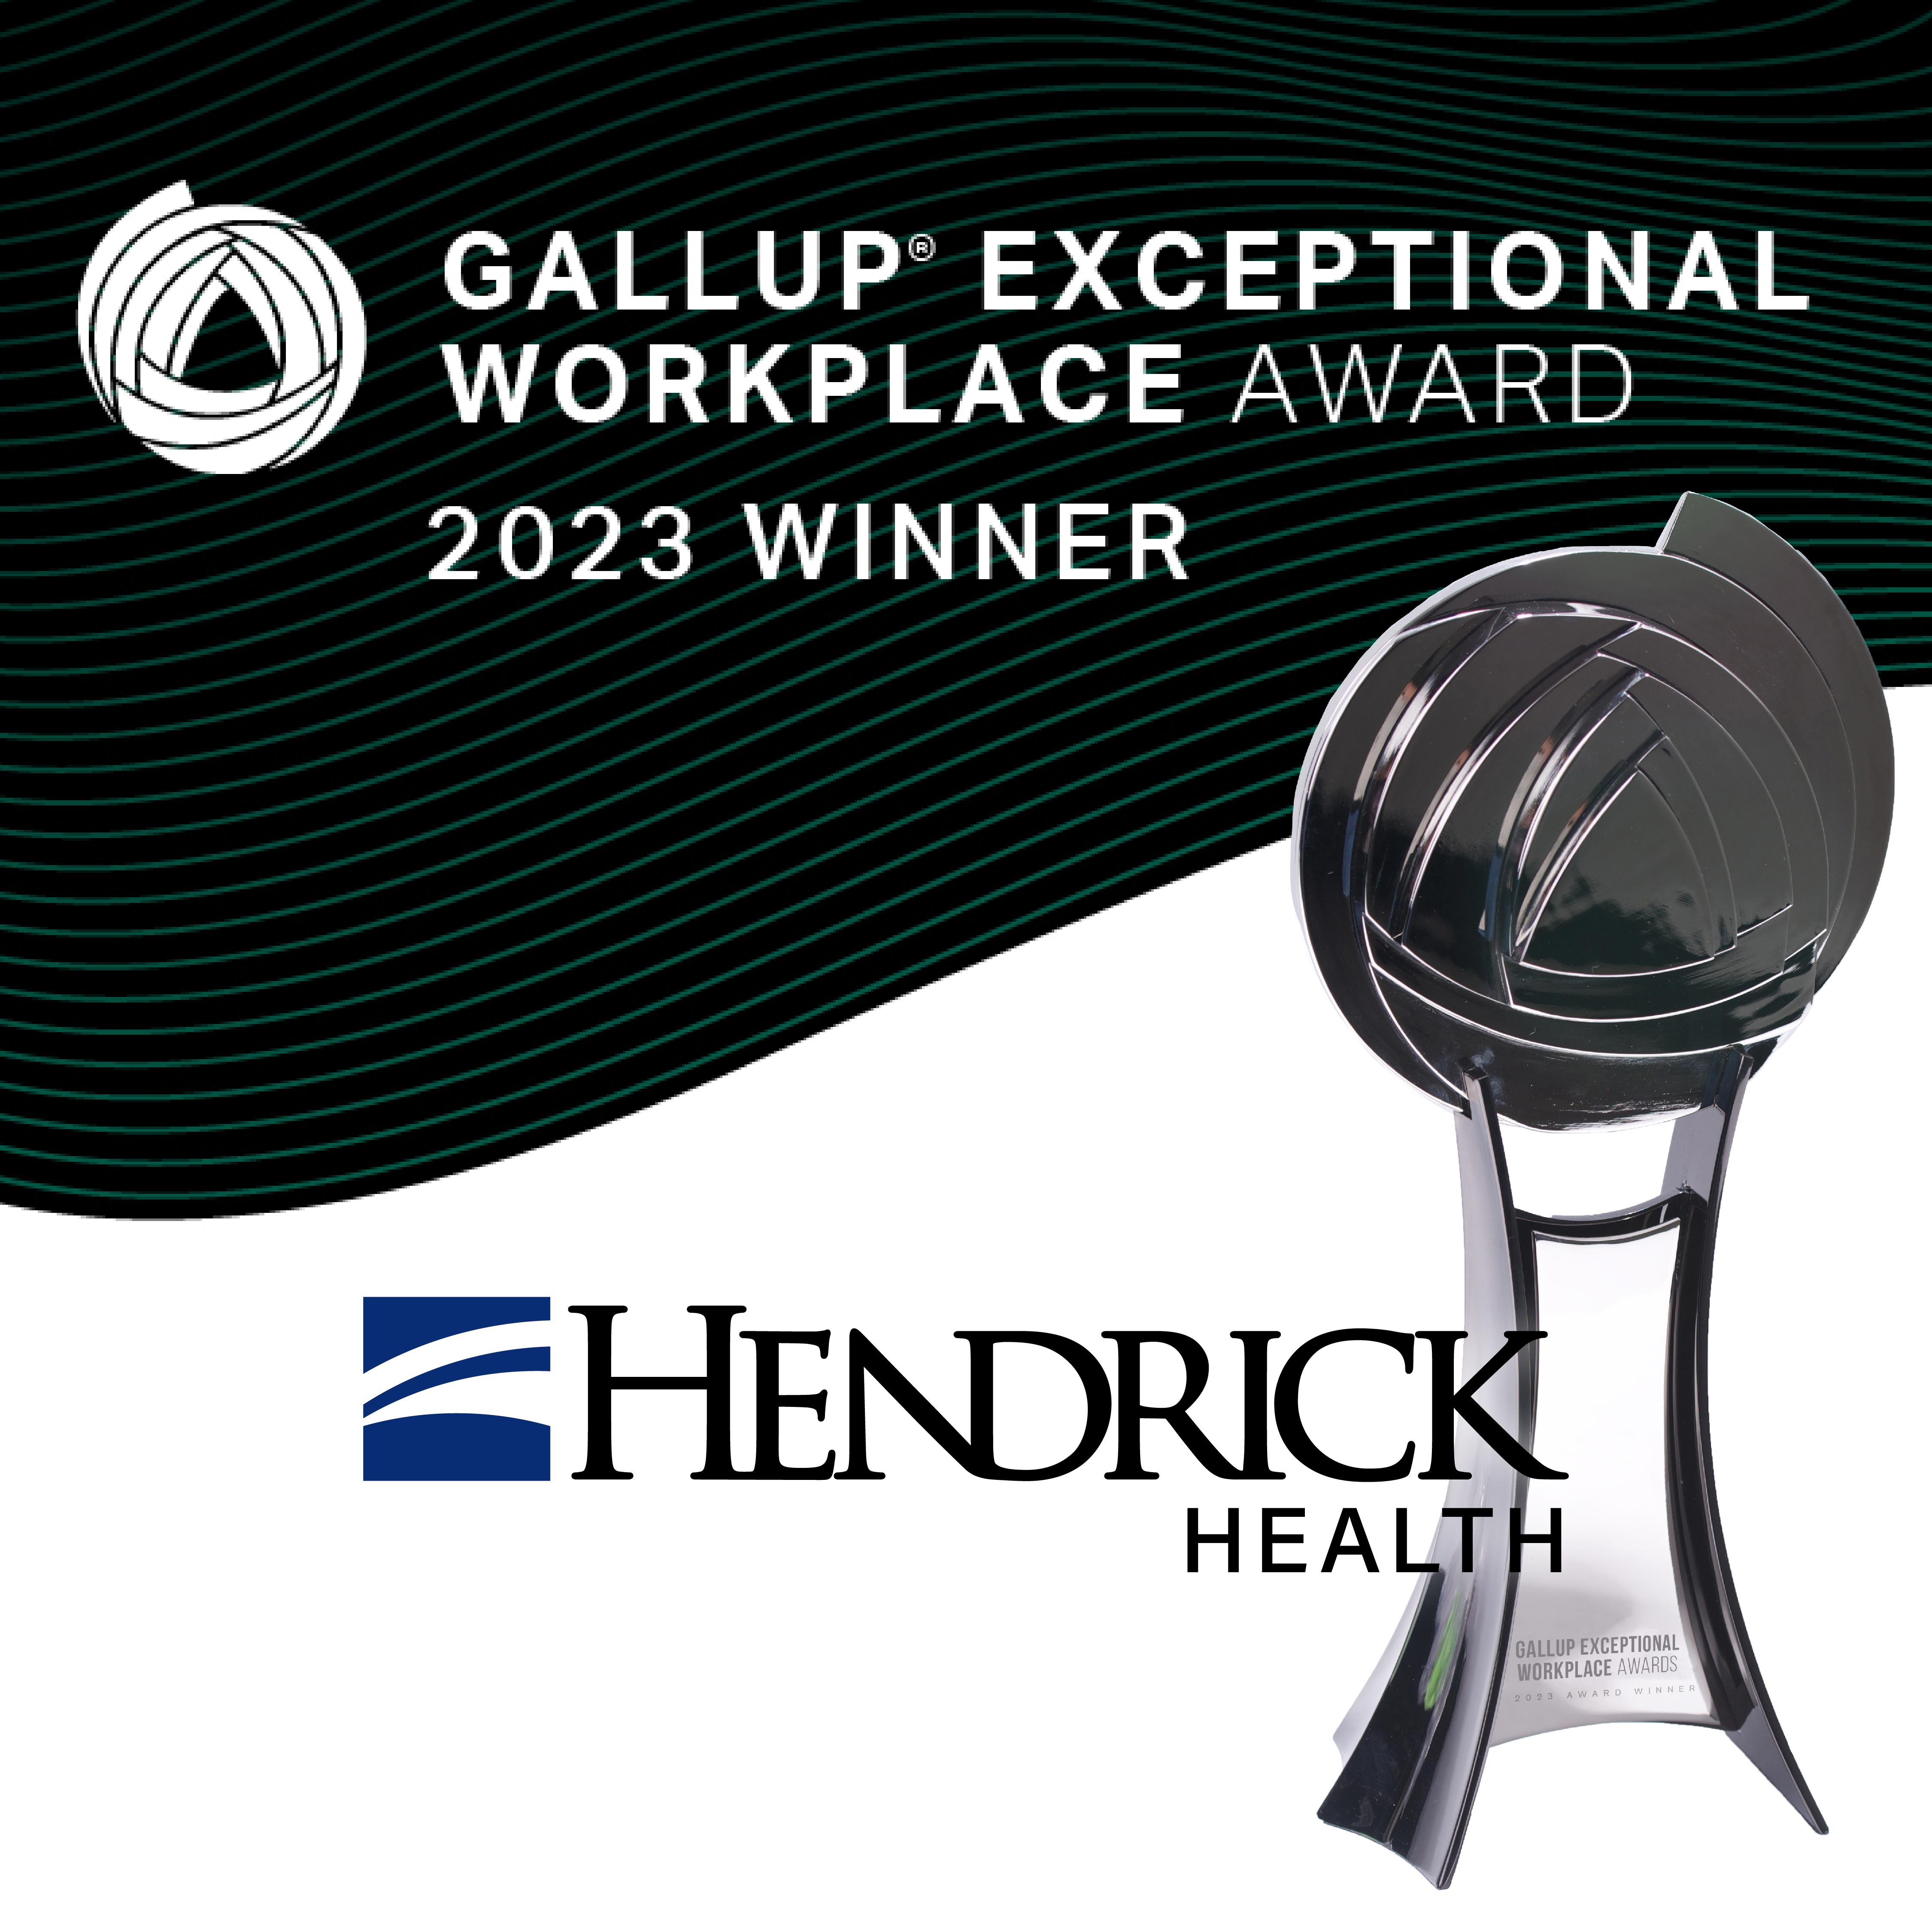 Hendrick Health awarded Gallup Exceptional Workplace Award Winner for